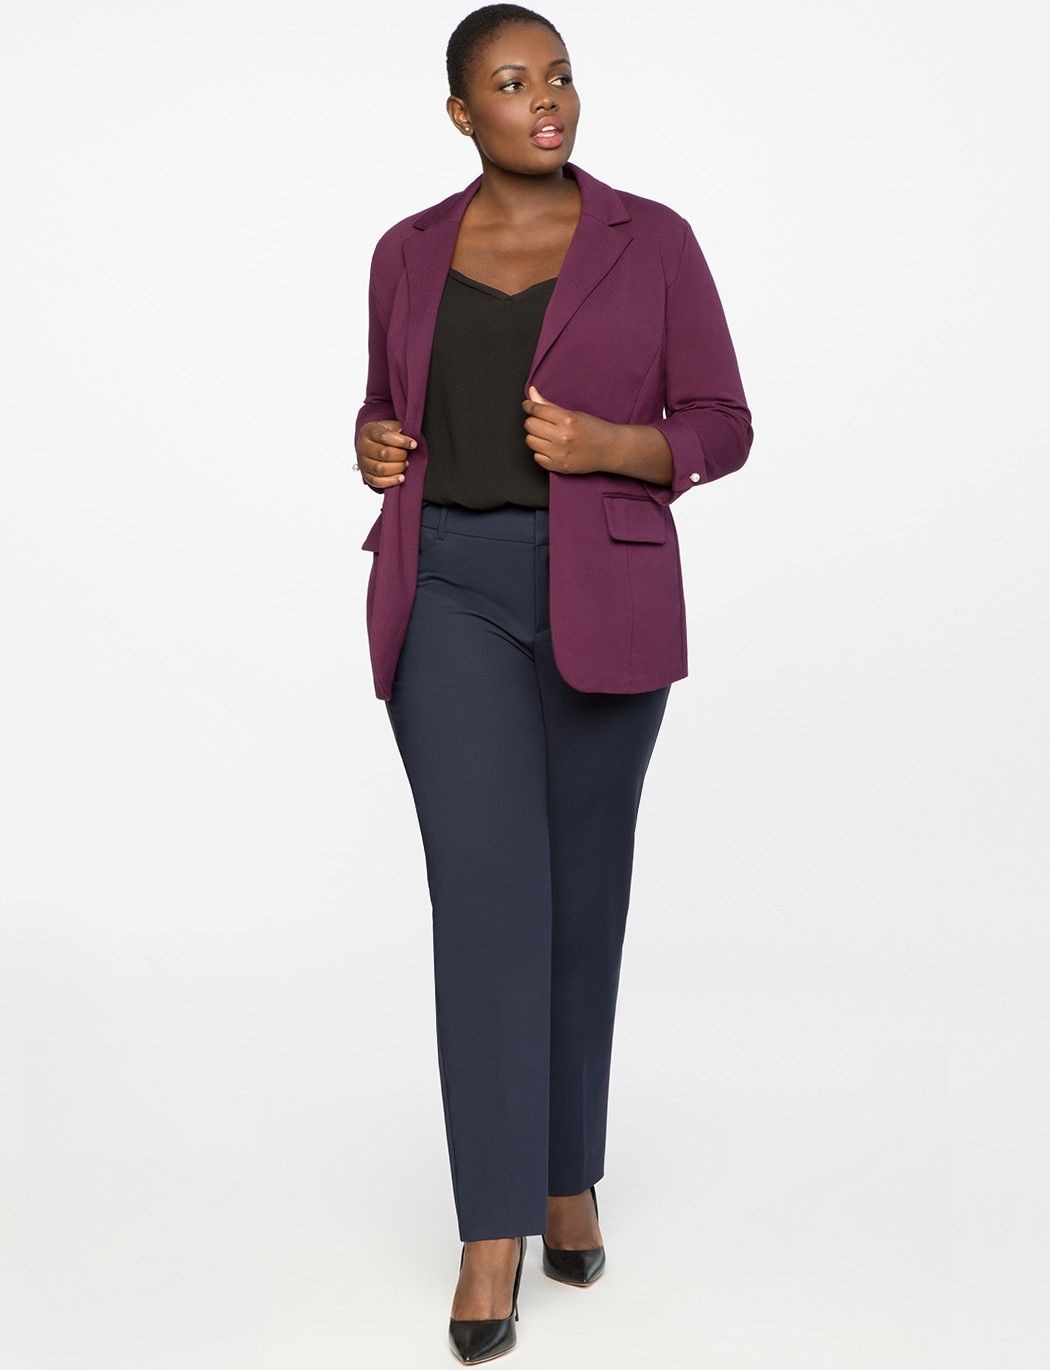 Beautiful Formal Attire For Office: Plus size outfit,  Office Outfit,  professional Outfit For Teens  